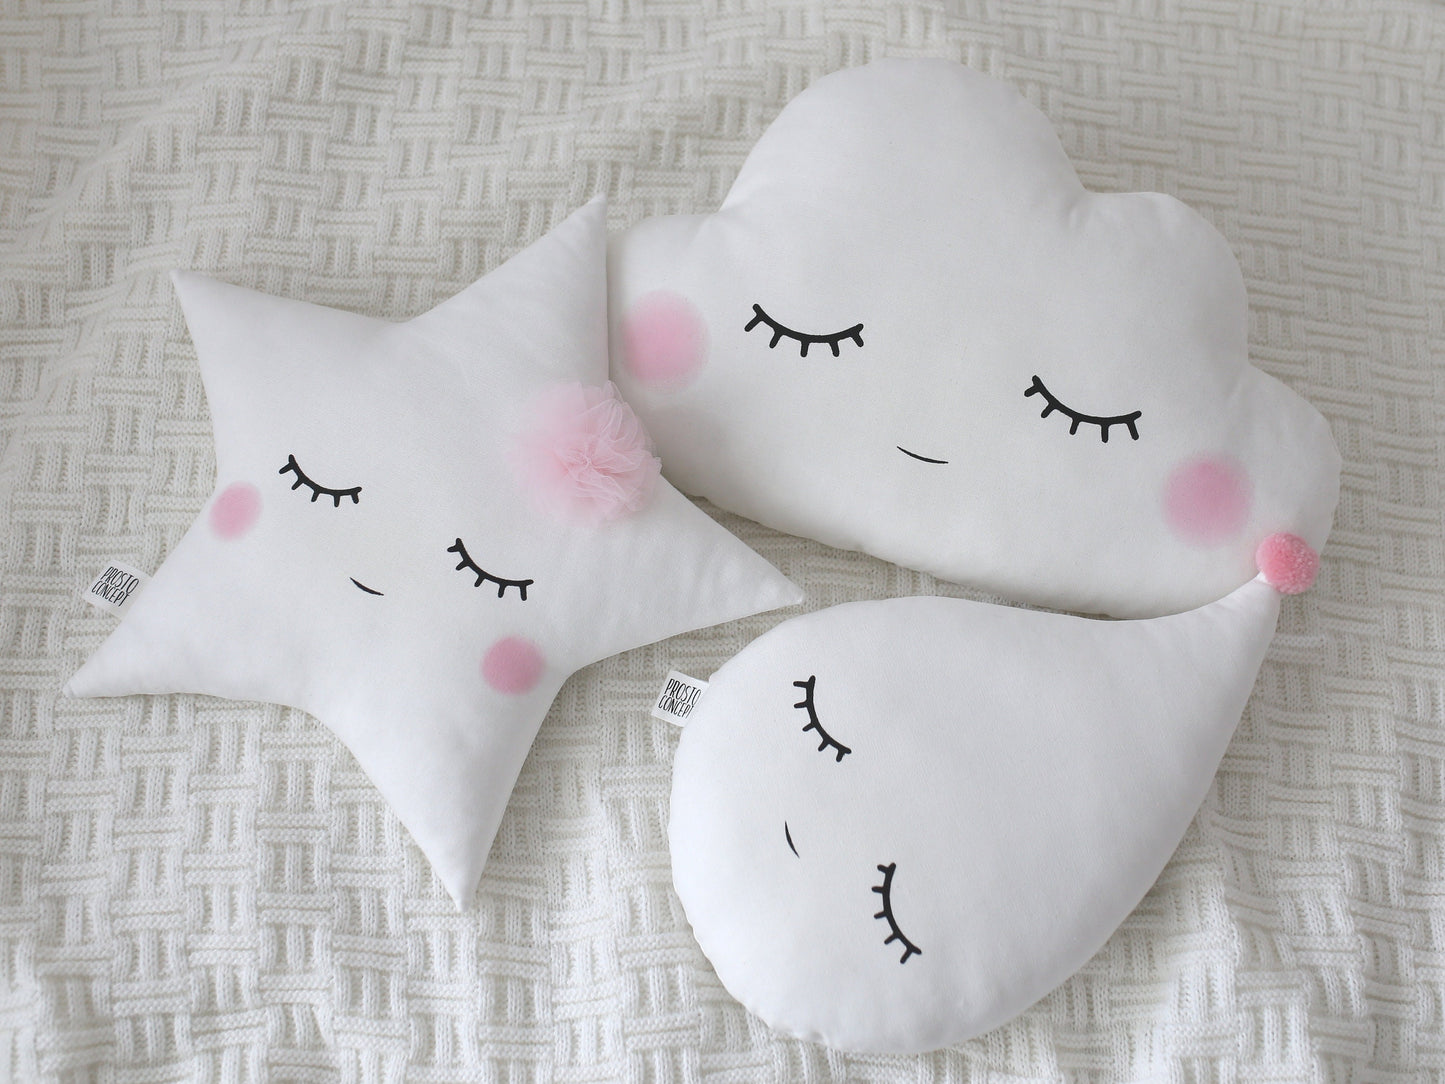 Set of 2 White Pillows - Cloud Pillow and Star Pillow with Tulle Flower